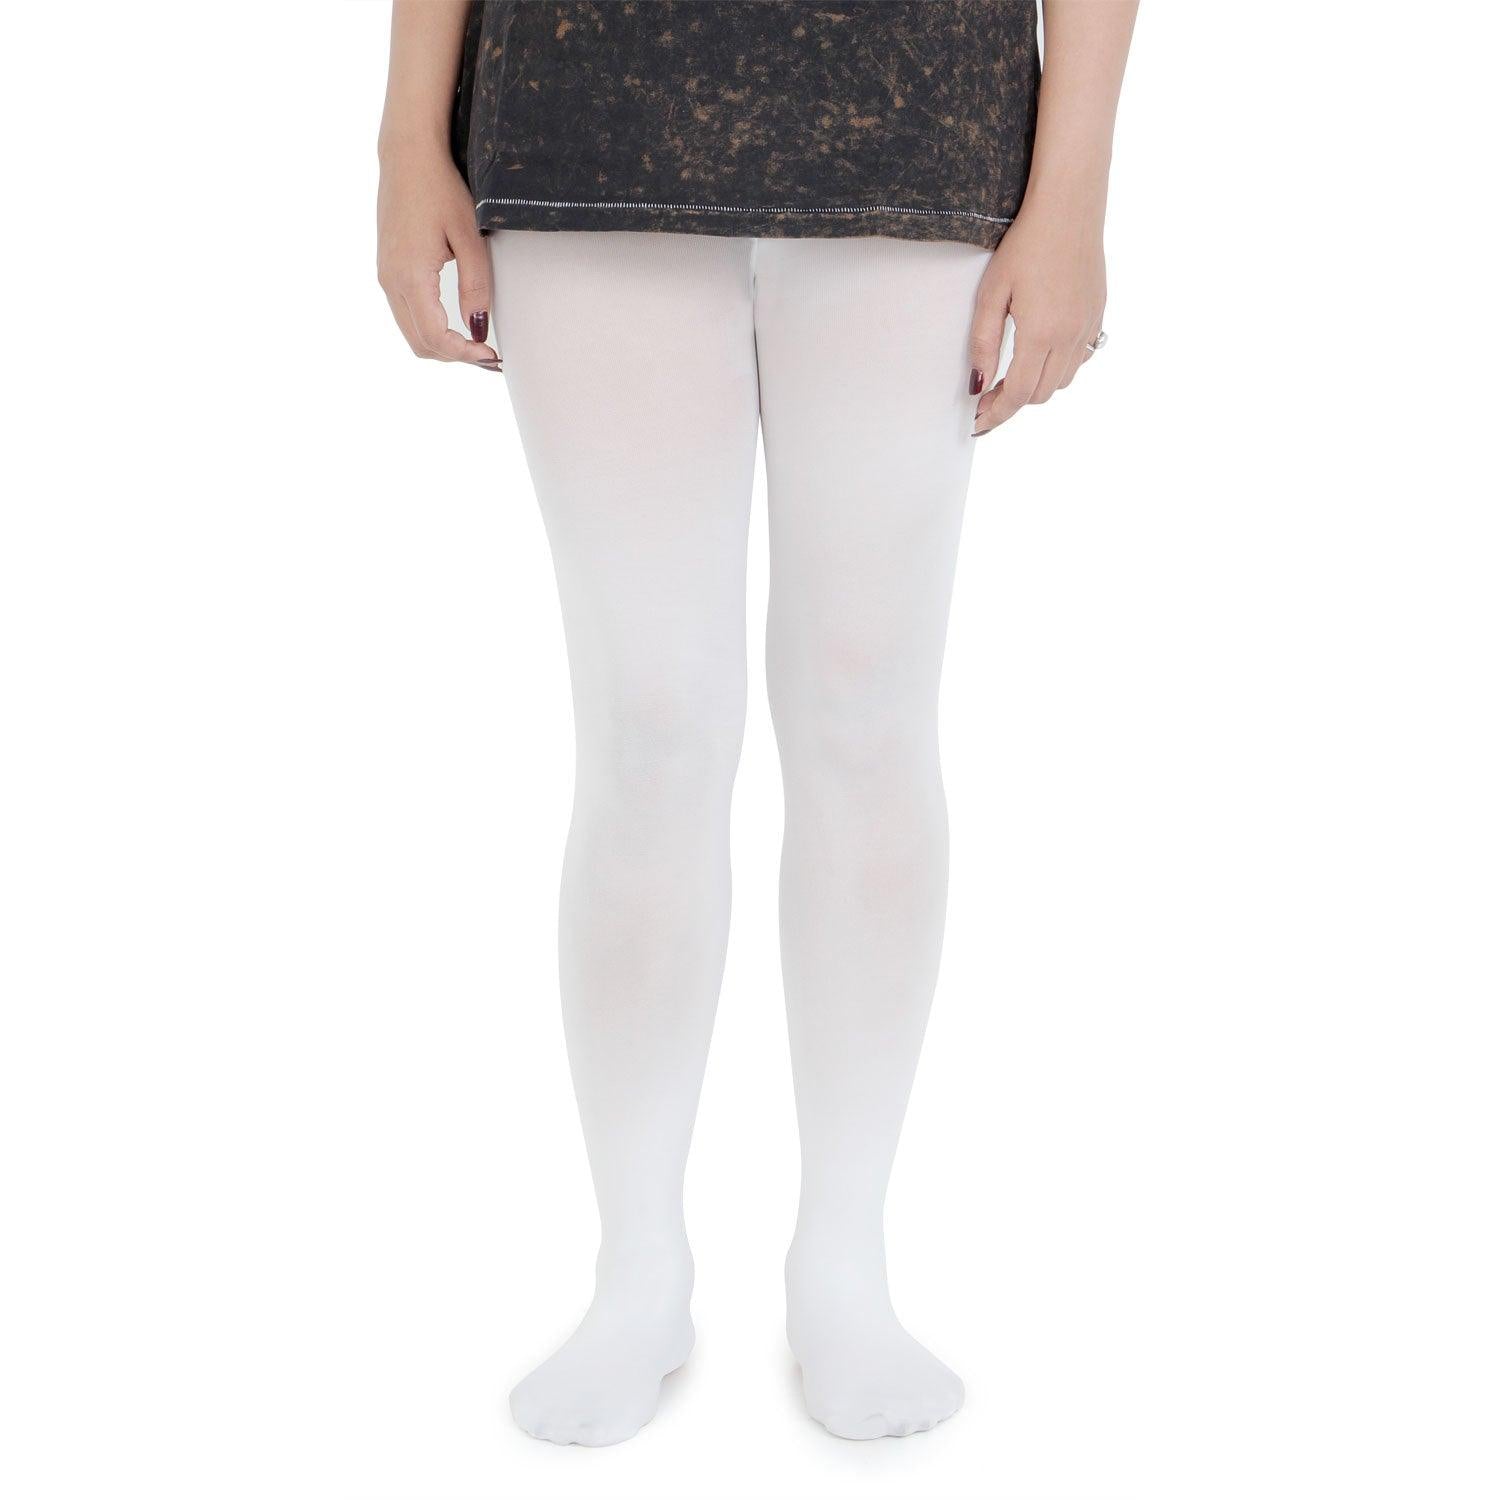 New Plain White Girls Tights available from 2-4 Years to 10-12 Years 